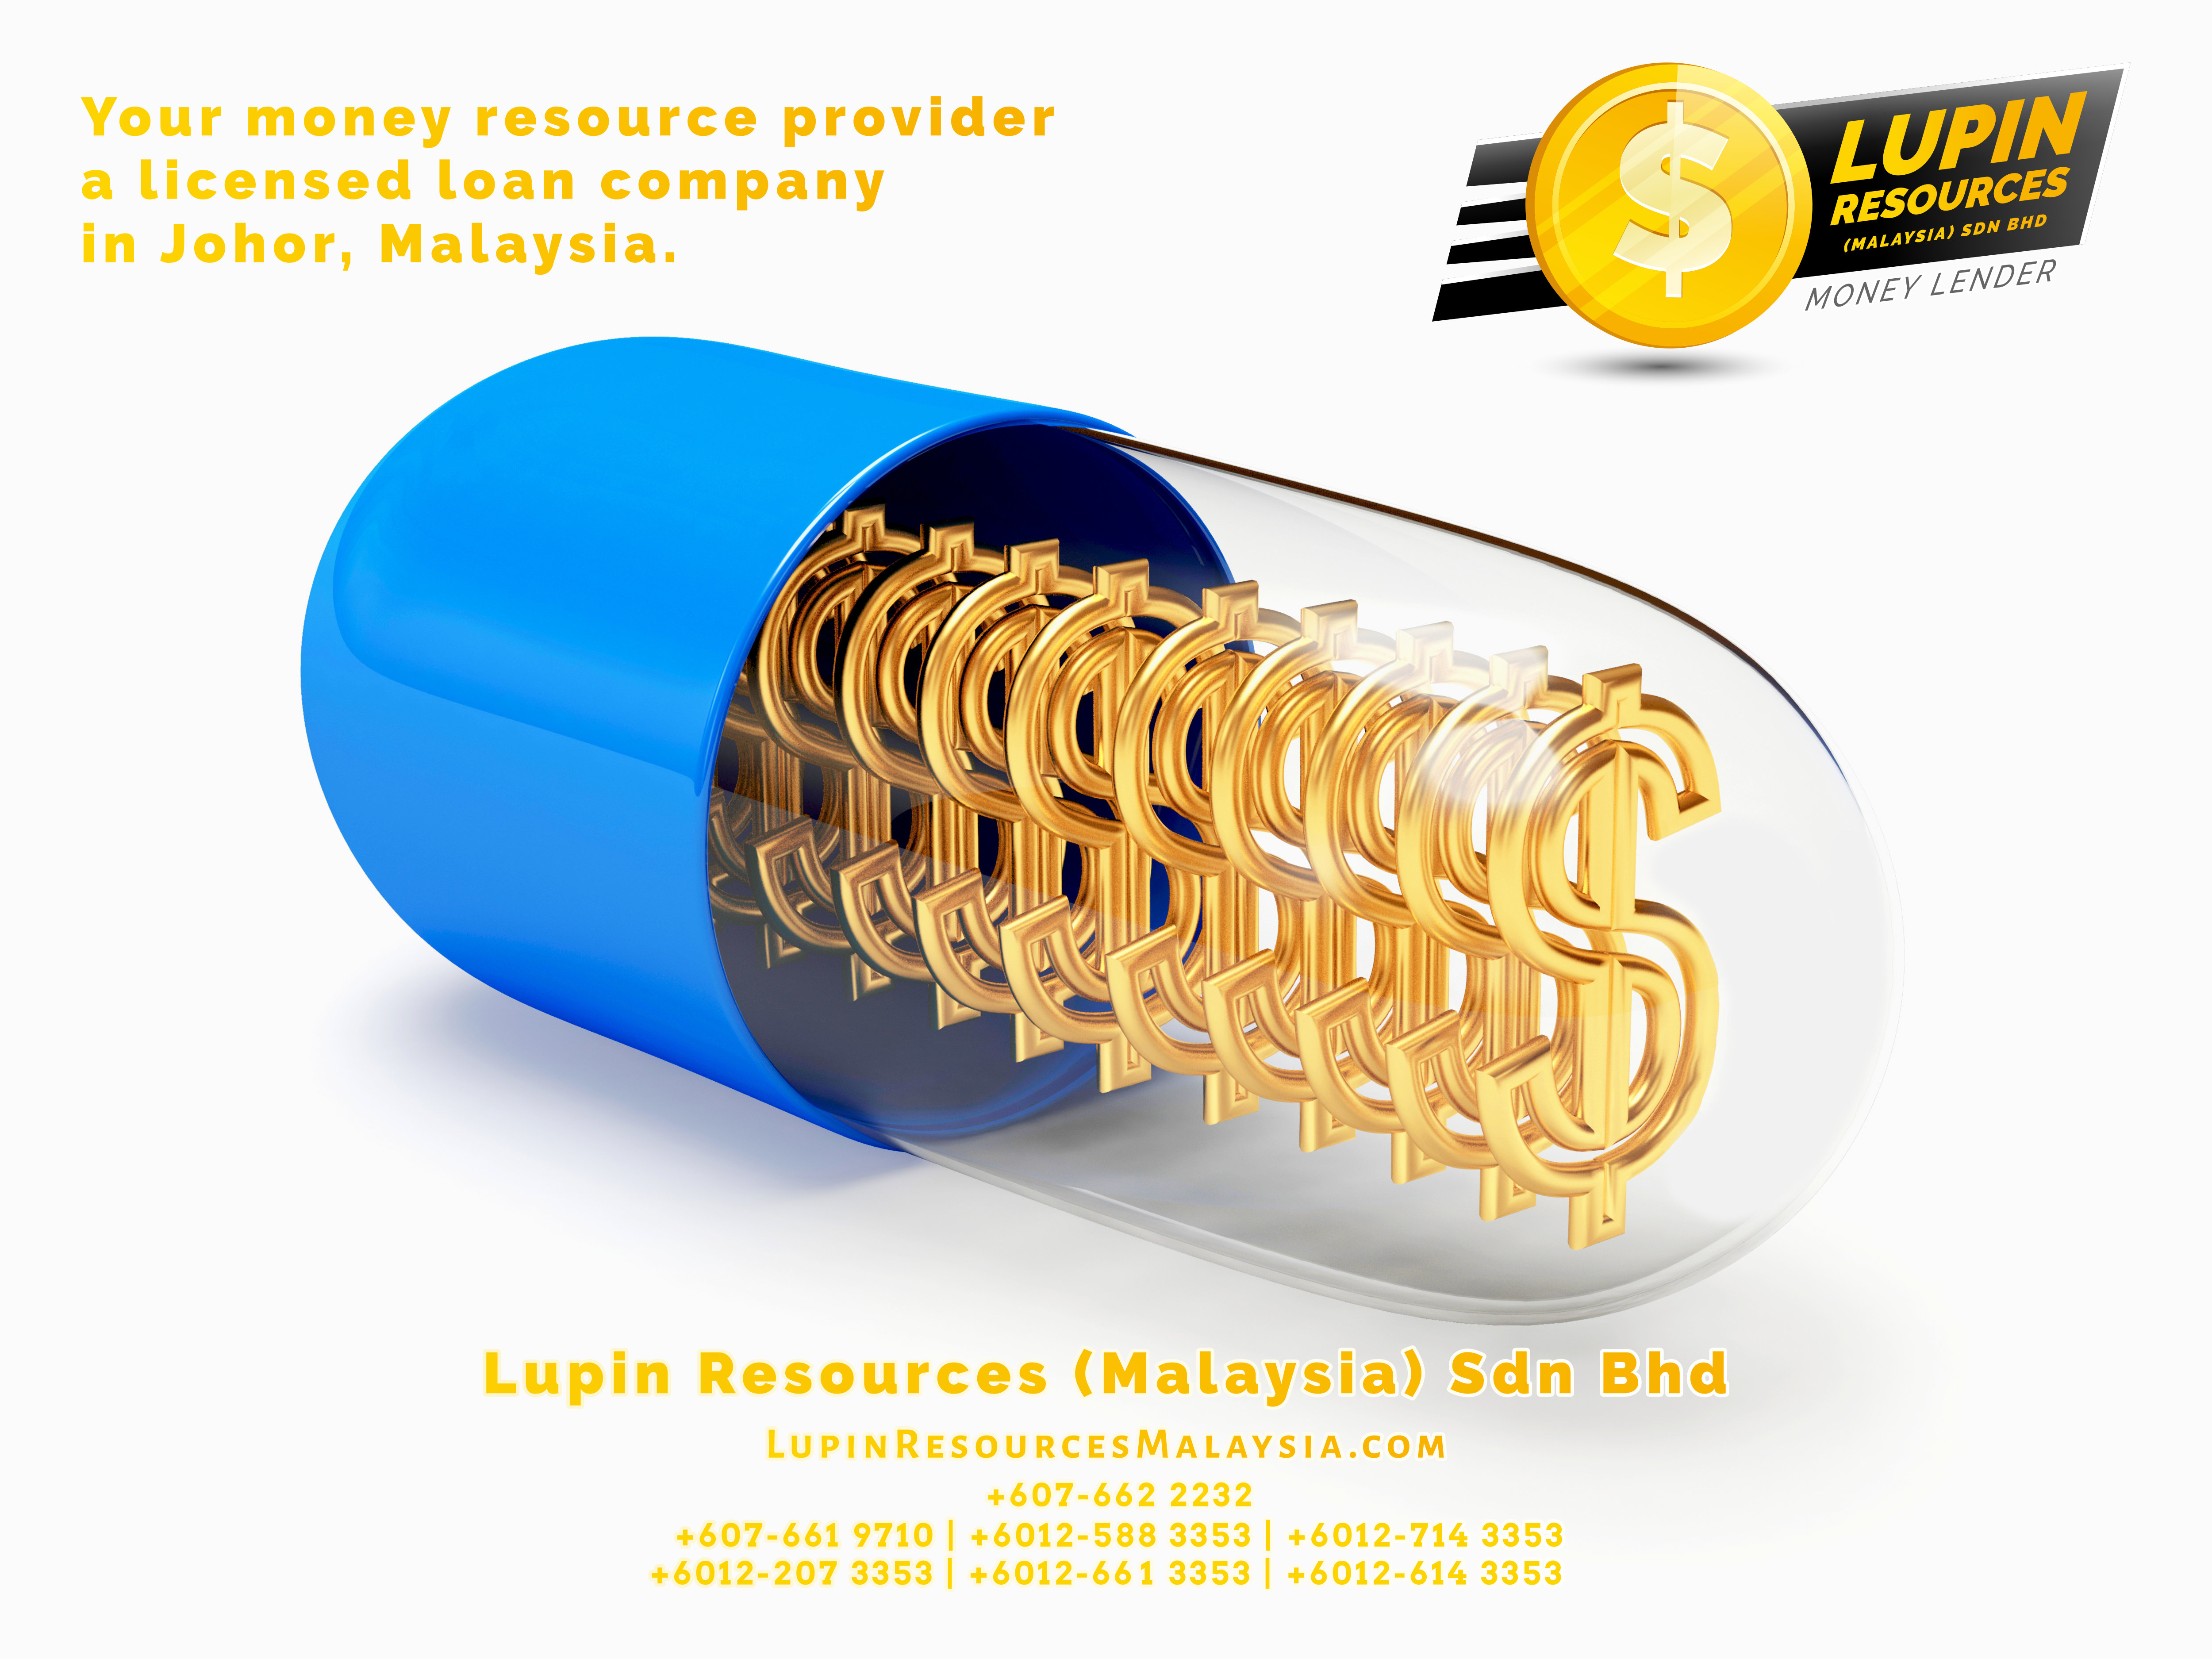 Johor Licensed Loan Company Licensed Money Lender Lupin Resources Malaysia SDN BHD Your money resource provider Kulai Johor Bahru Johor Malaysia Business Loan A01-37